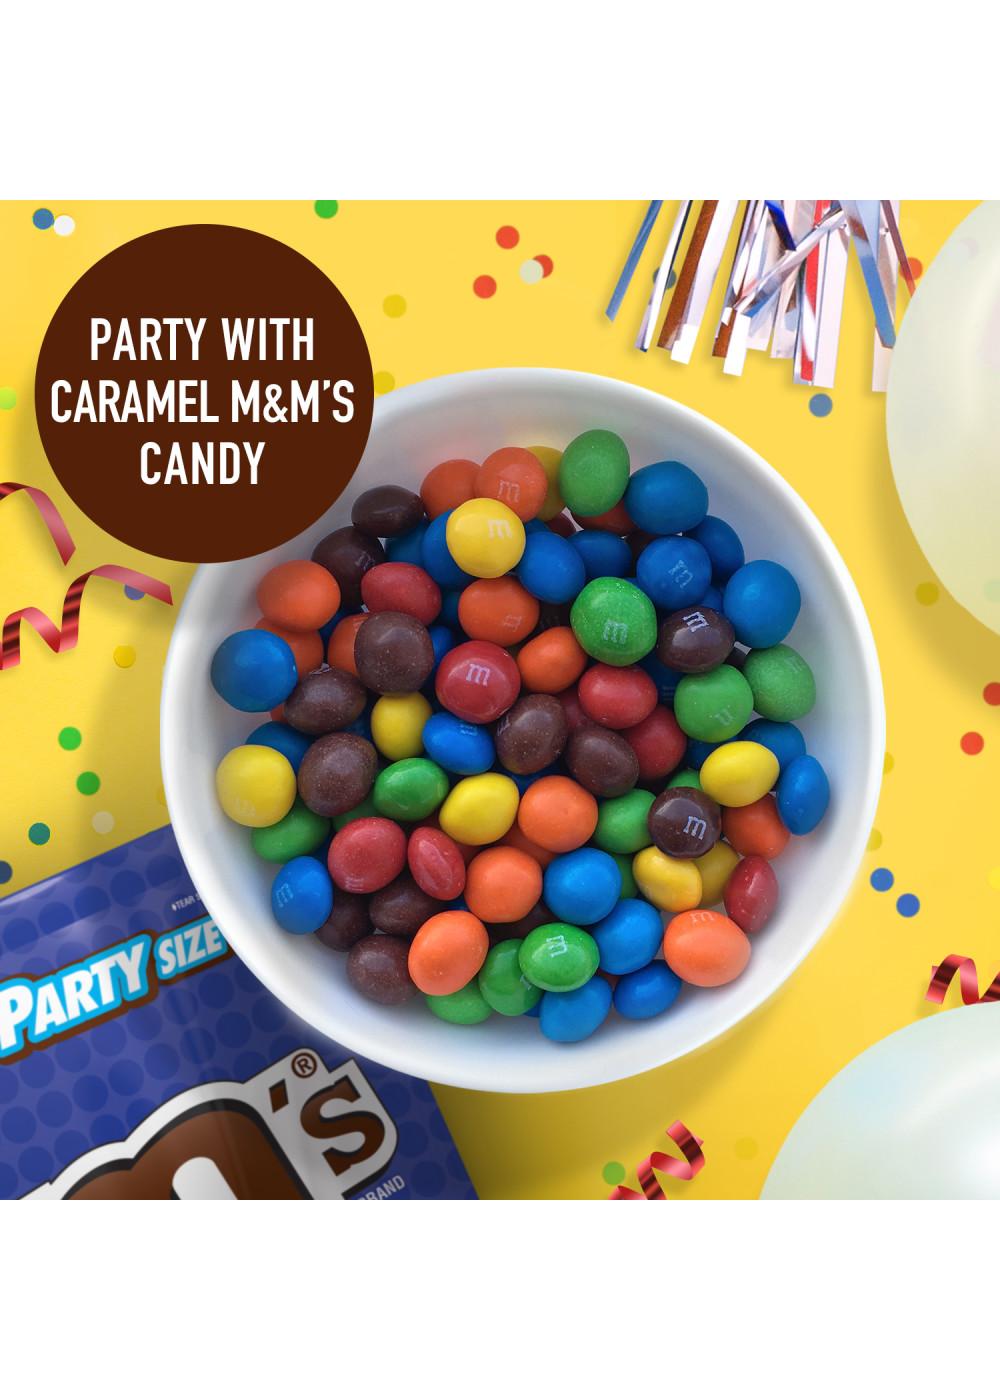 M&M's Caramel Chocolate Candy, Party Size; image 6 of 6